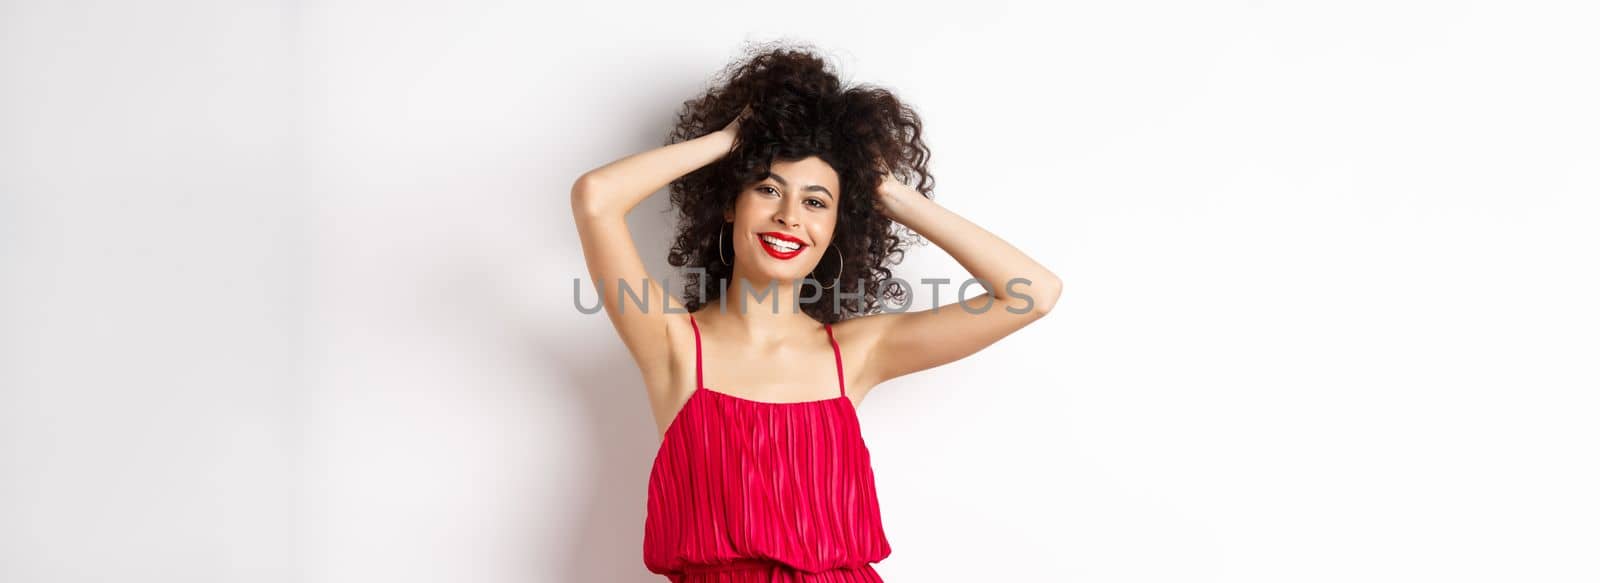 Happy smiling woman touching her curly hair and laughing, standing in red dress on white background.